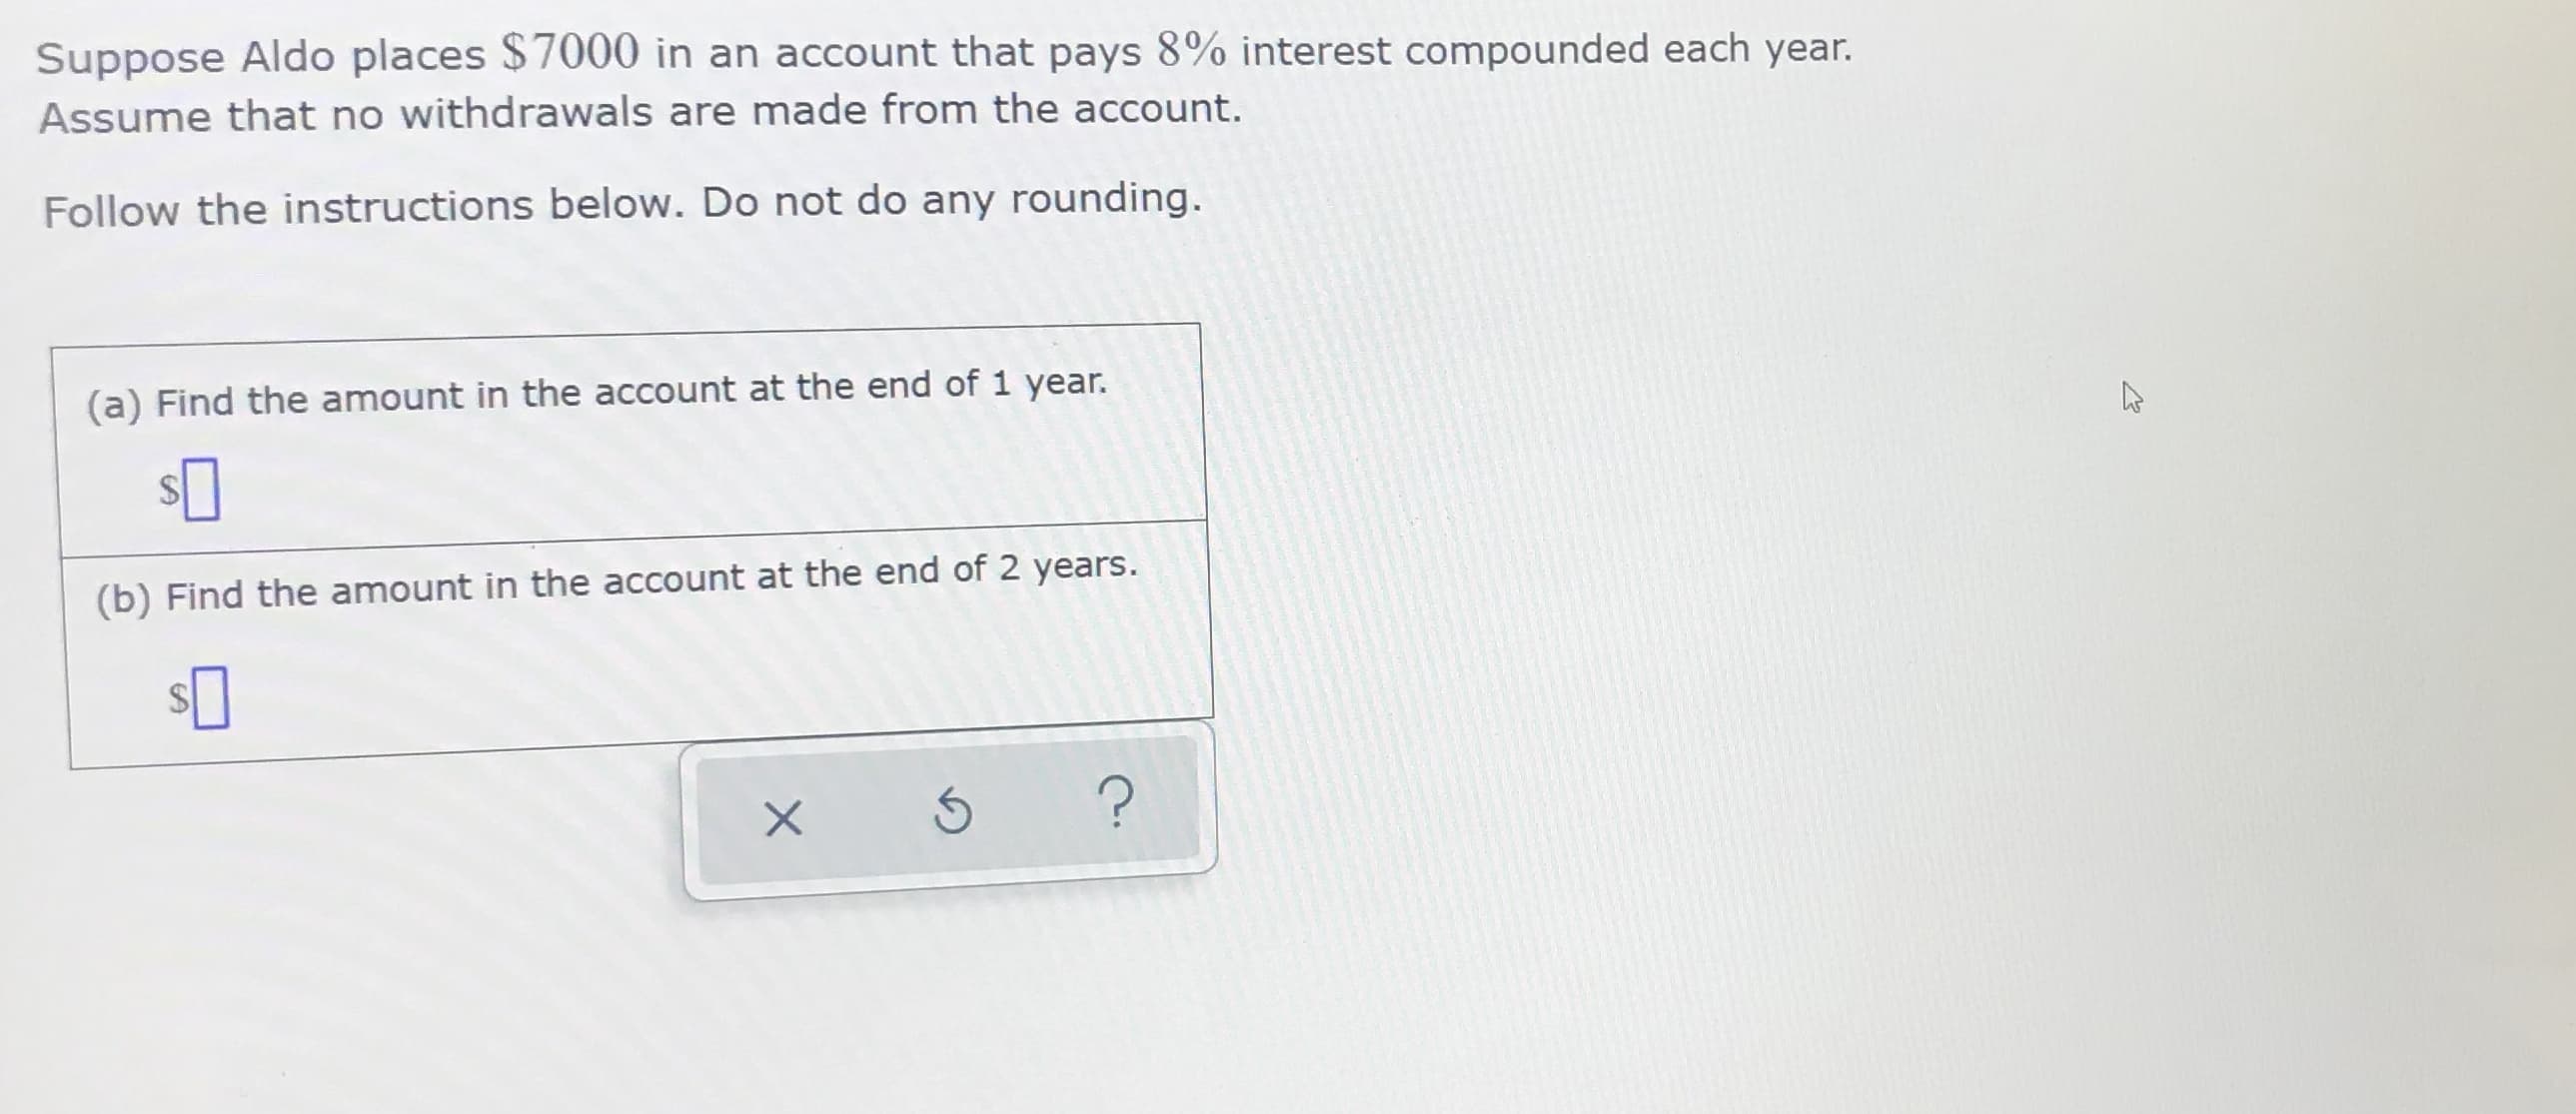 Suppose Aldo places $7000 in an account that pays 8% interest compounded each year.
Assume that no withdrawals are made from the account.
Follow the instructions below. Do not do any rounding.
(a) Find the amount in the account at the end of 1 year.
(b) Find the amount in the account at the end of 2 years.
